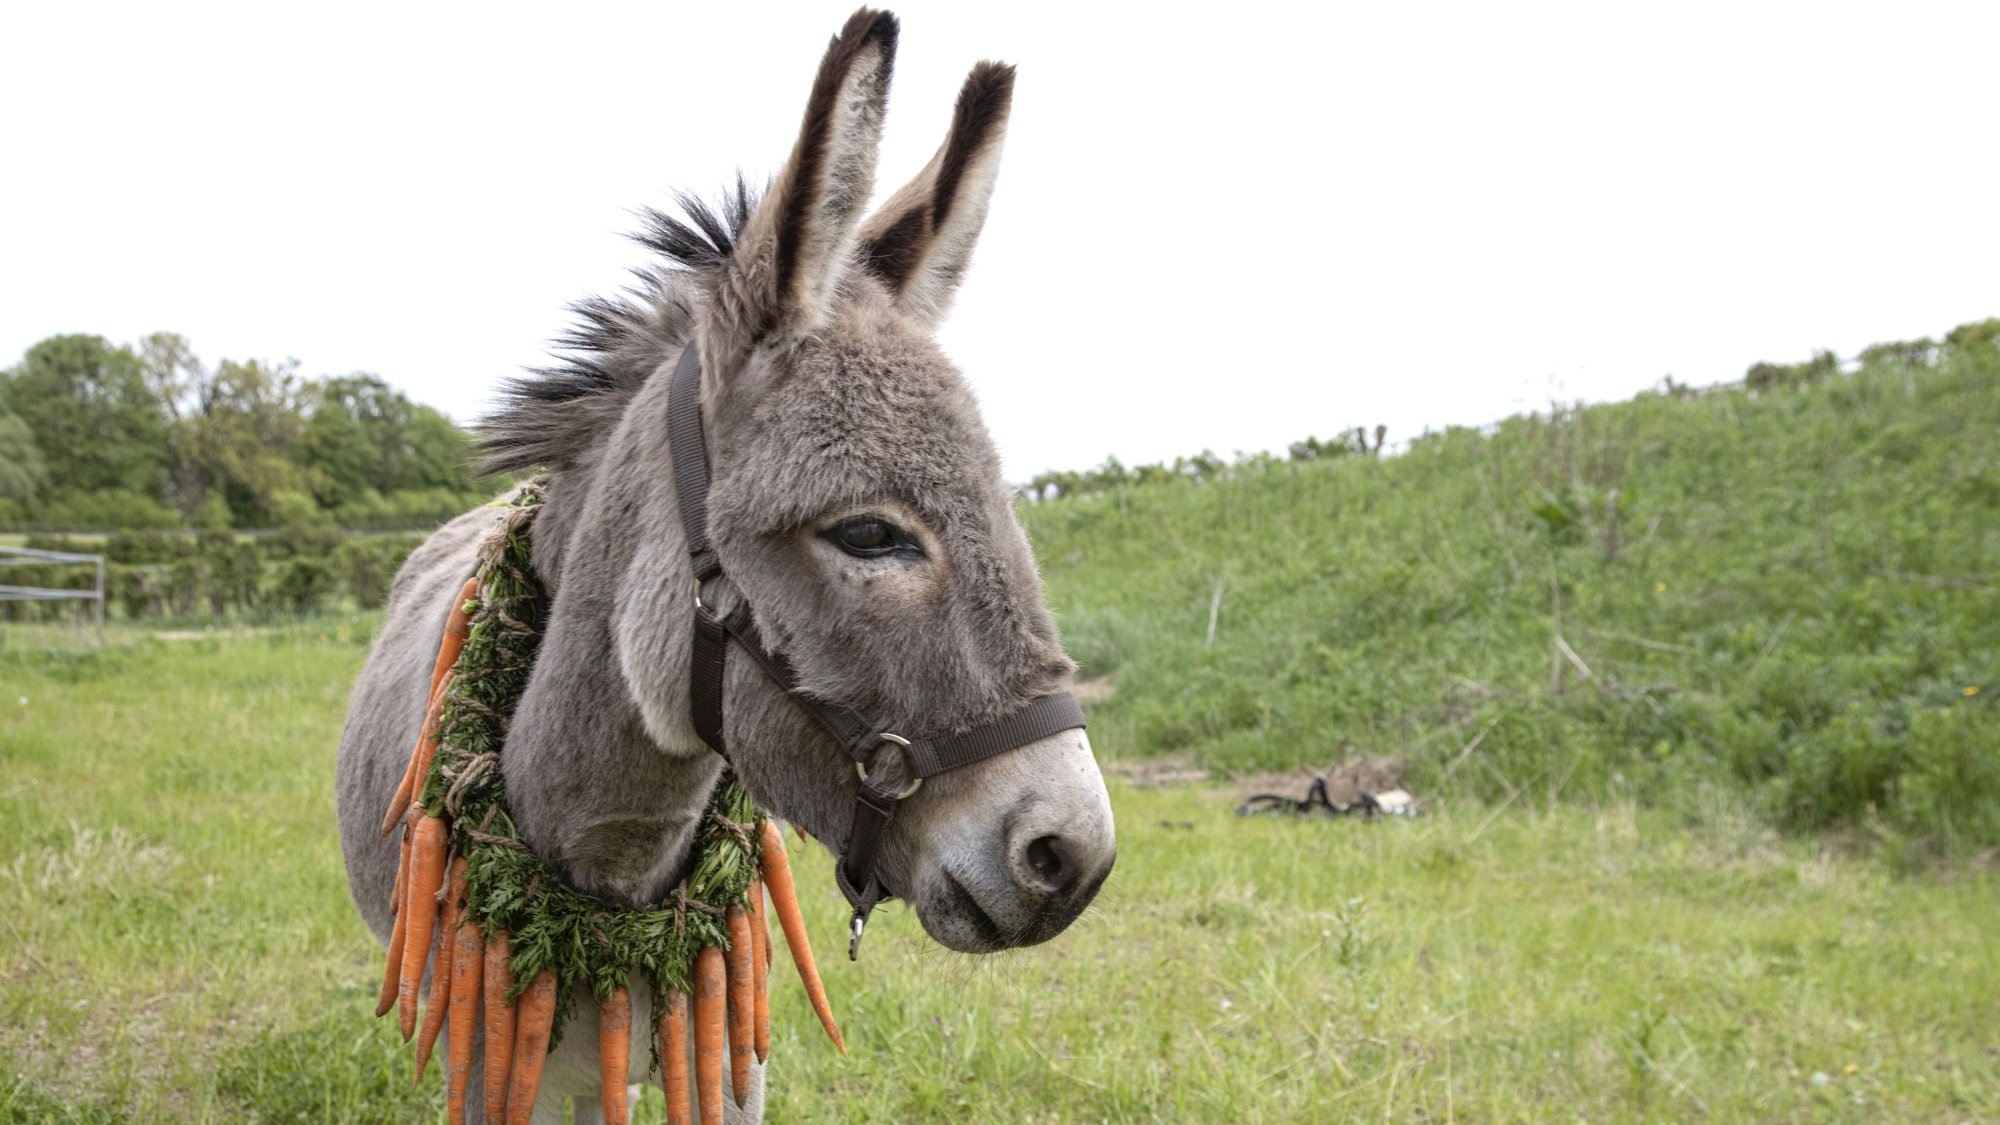 A donkey with carrots around its neck stands in a green field.